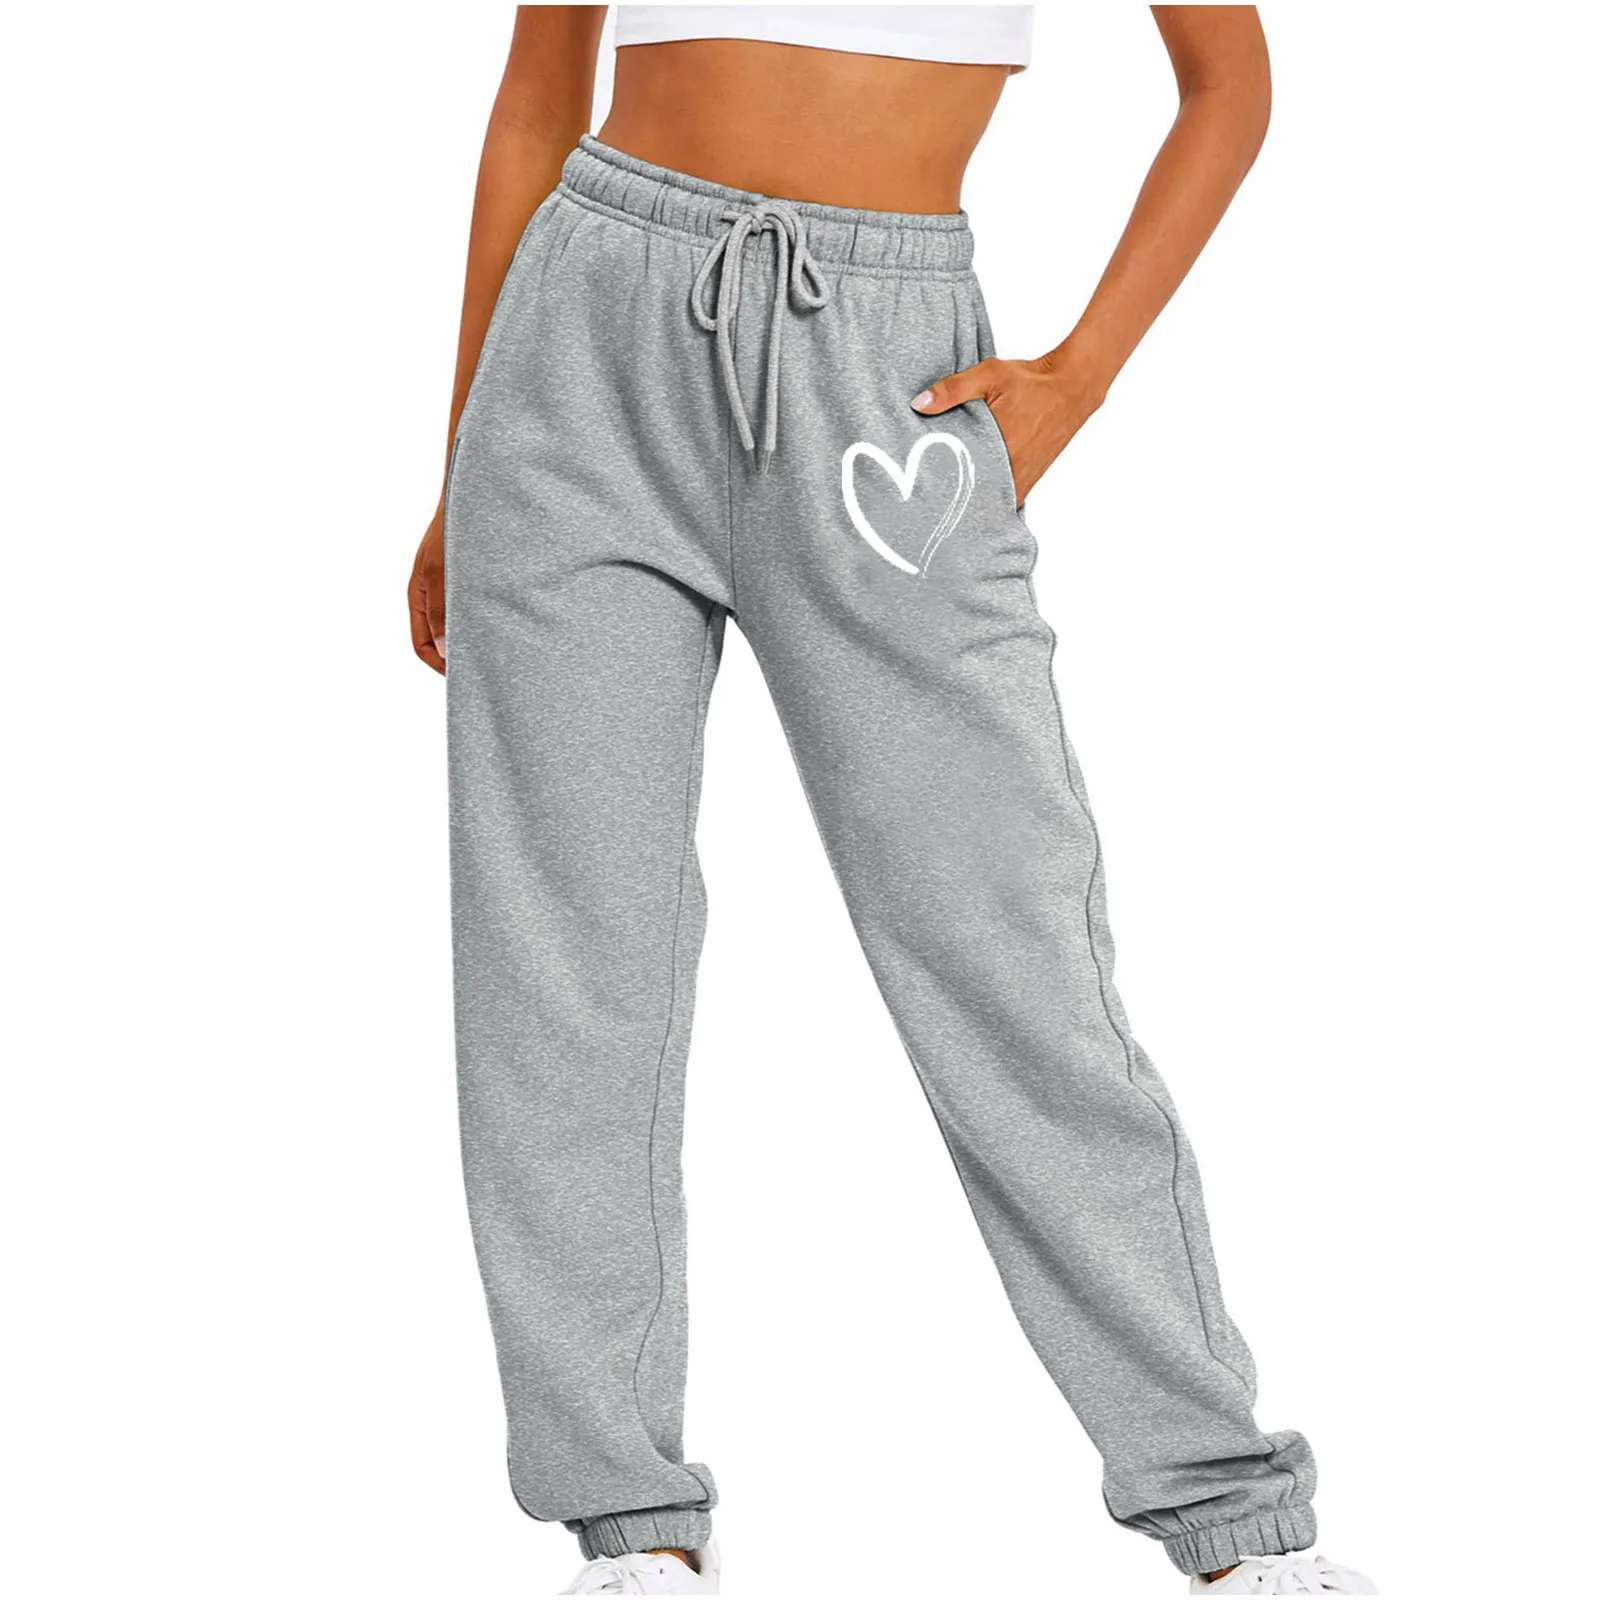 

Women'S Printed Casual Pants Sports Waist Draw In Lace Up Elasticized Waist Small Legs Pocket Female Jogging Loose Sweatpants